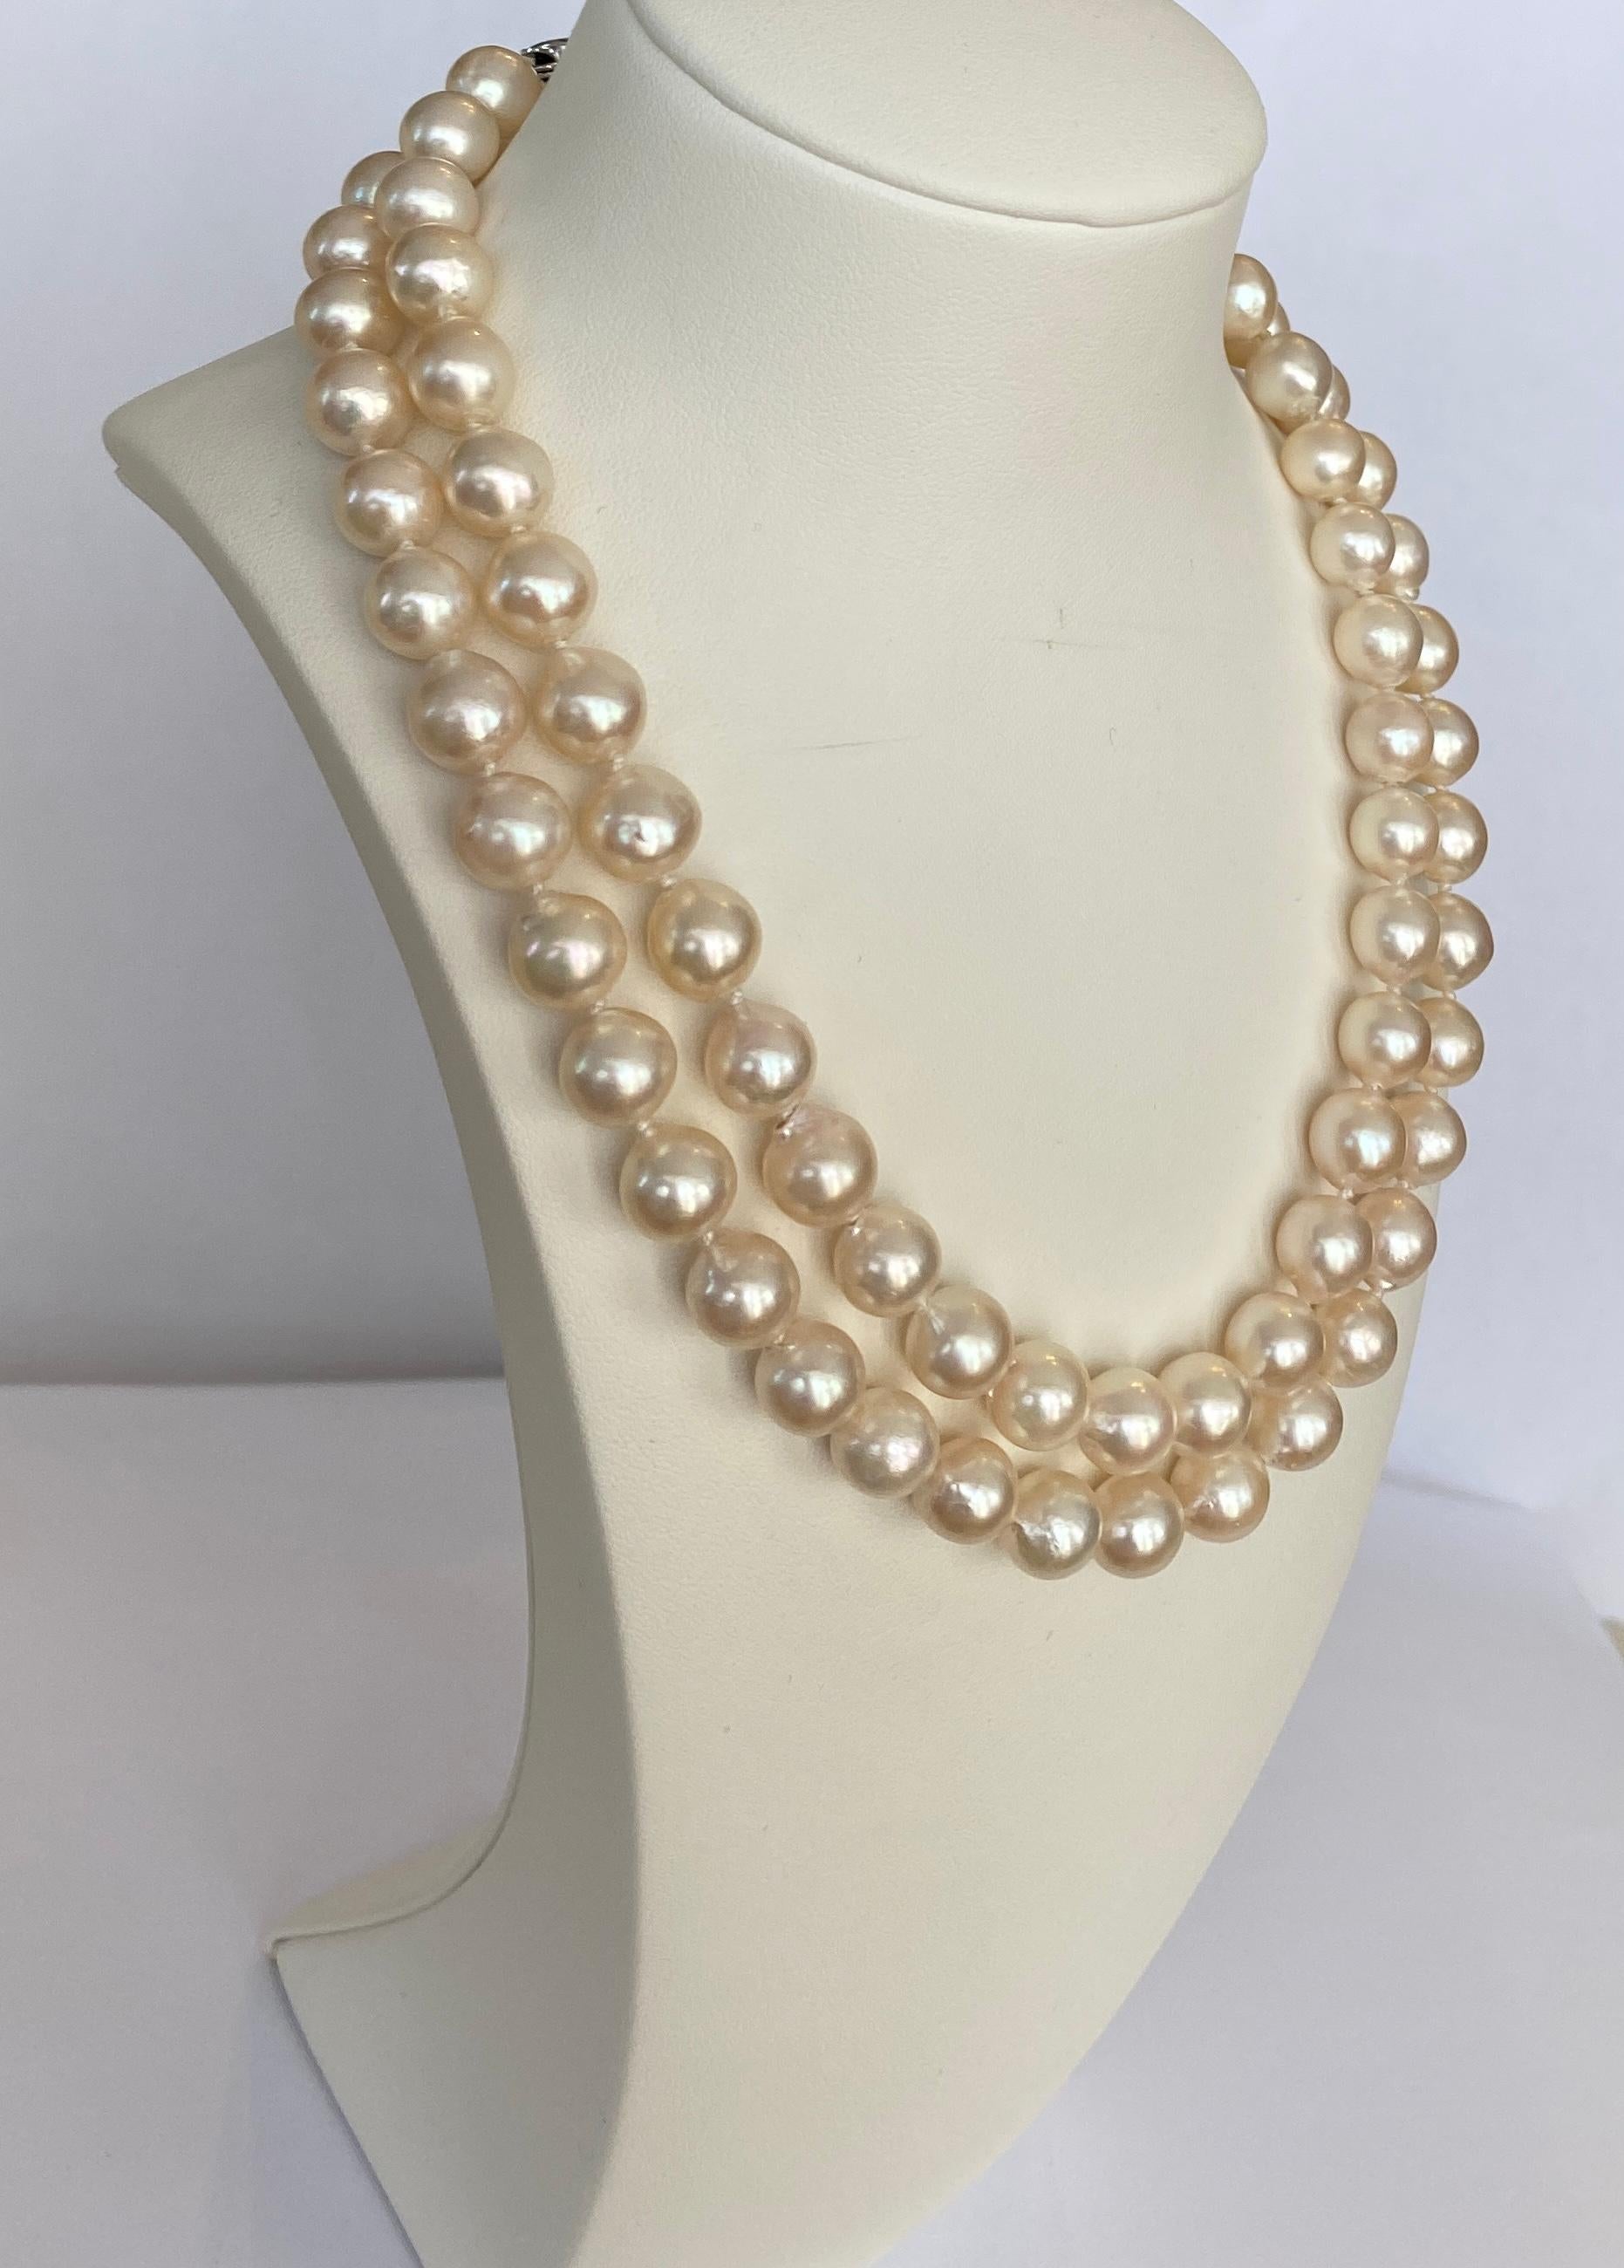 Offered, two Akoya pearl necklace with 18 kt white gold clasp, marked with JKA and 750.
Akoya pearls are  75 pieces. Diameter of pearls is from 8.50mm to 9.20mm.
Length: 38 cm
Length: 41 cm
Gross weight: 83 grams
Gold weight: 6.4 grams
The piece of